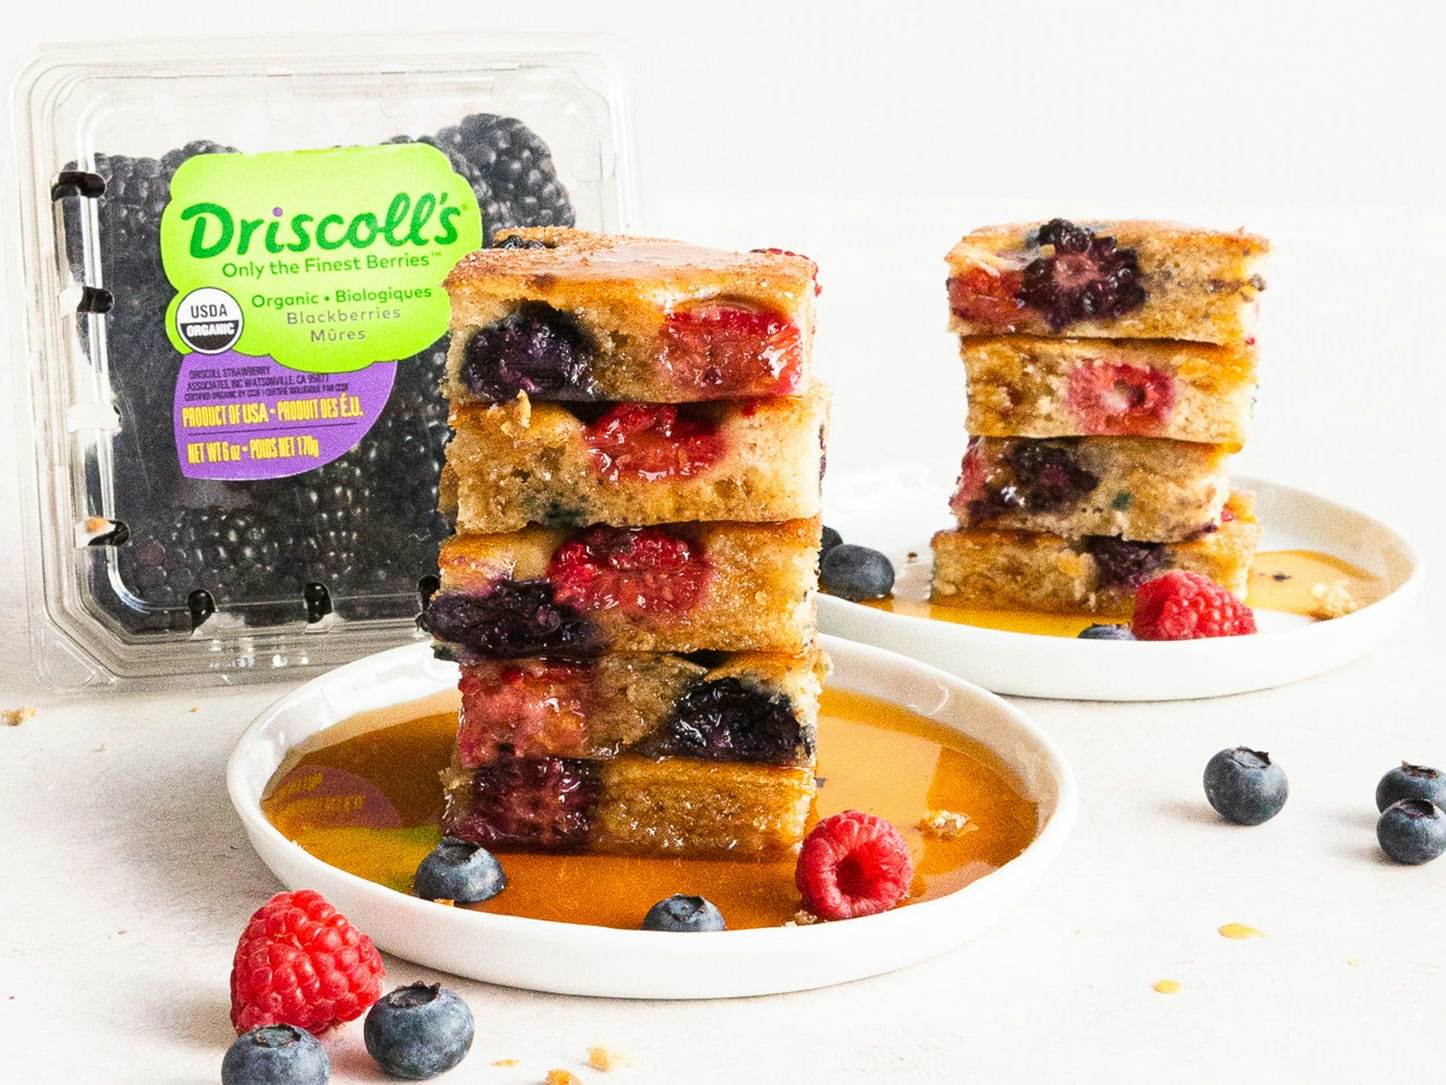 Berry Sheet Pan Pancakes with Driscolls Berries